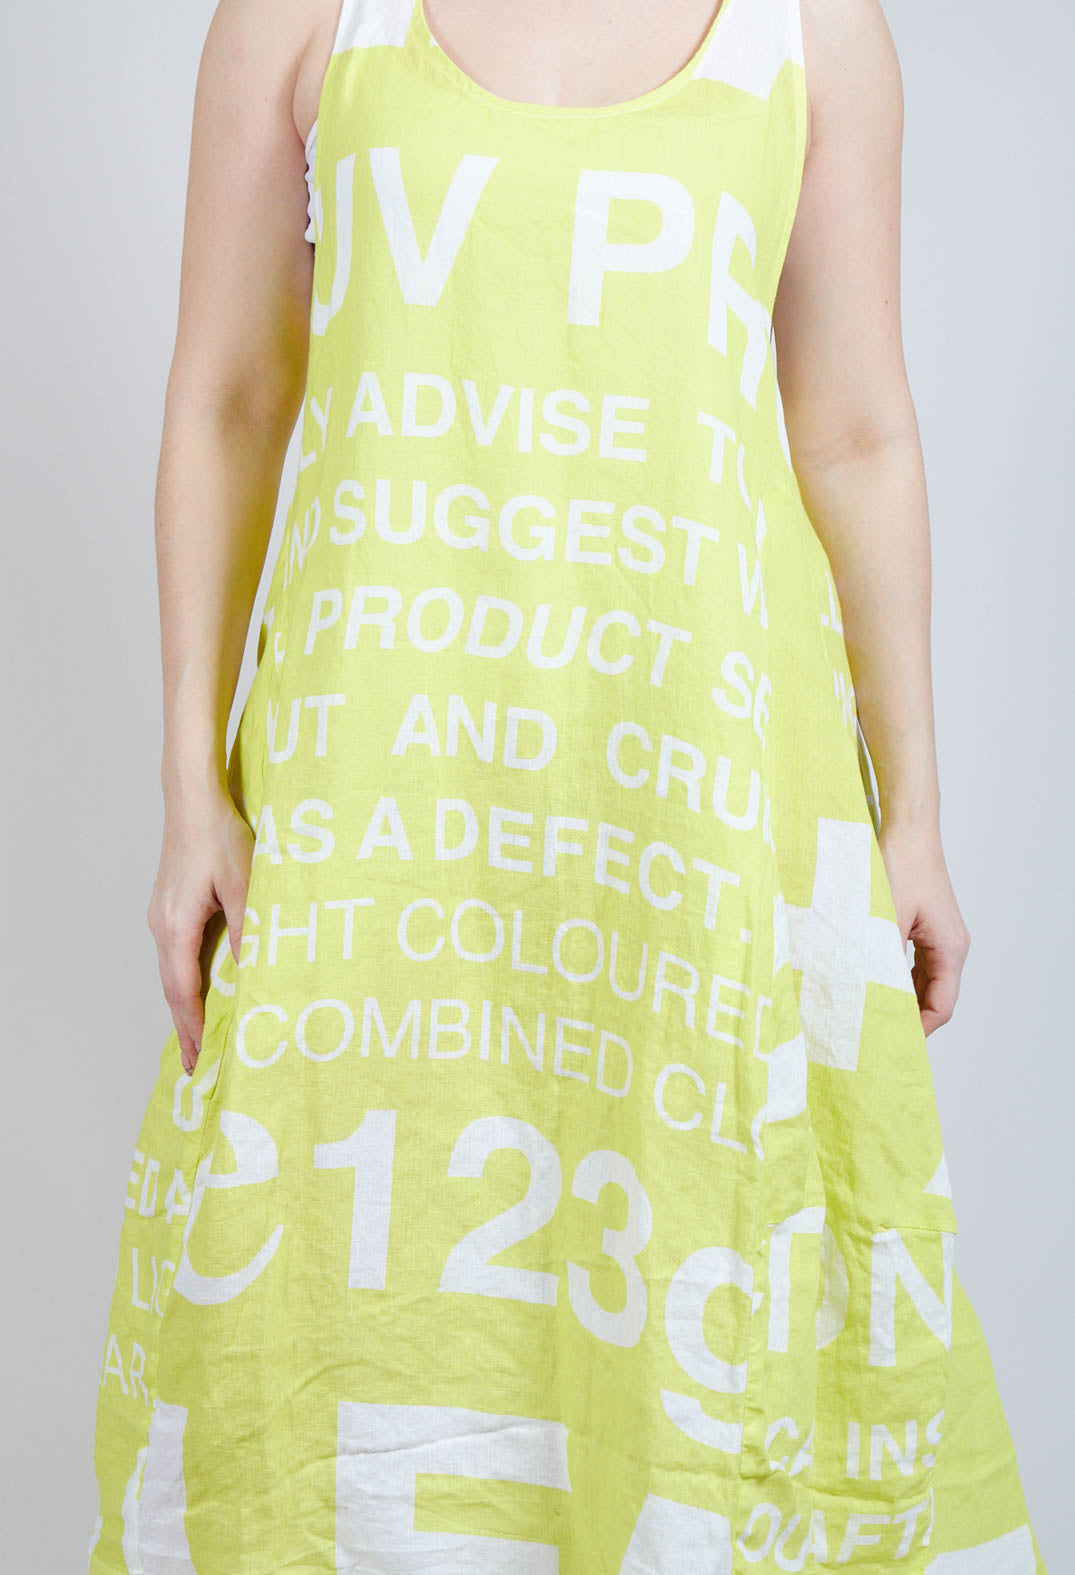 Sleeveless Linen Dress with Large Lettering in Sun Print